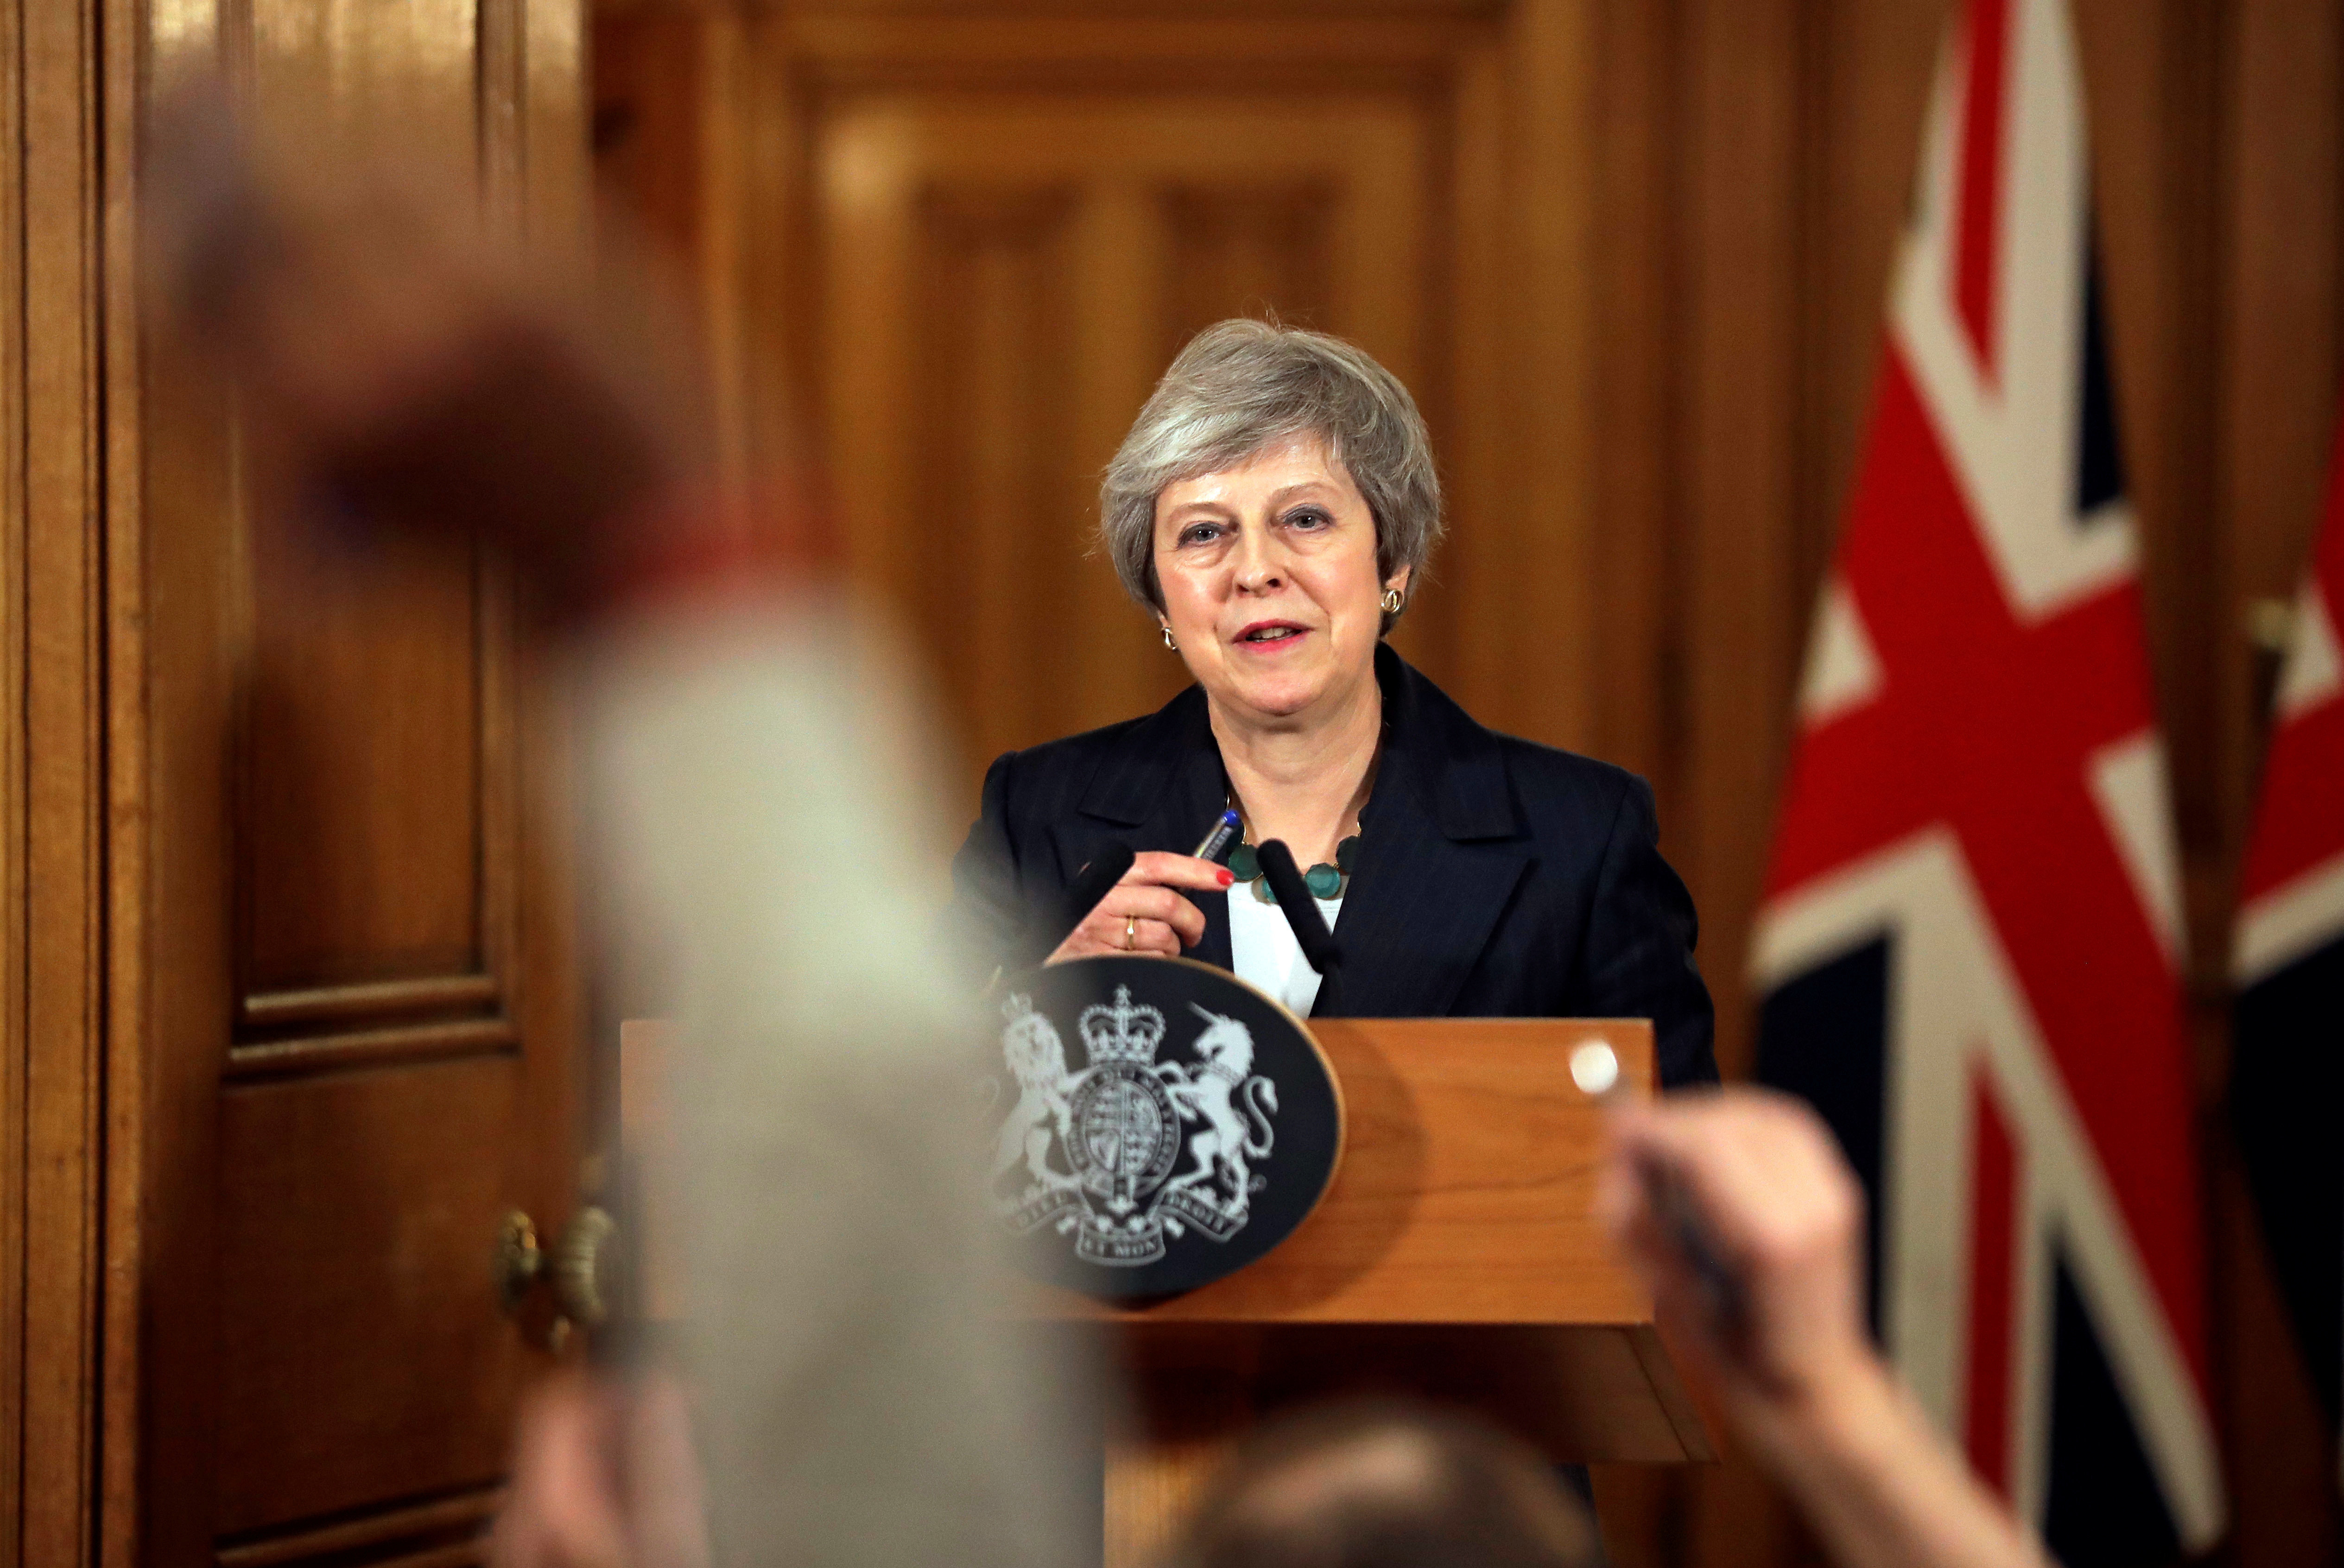 UK PM Theresa May: A Resilient Politician Facing a Tough Fight